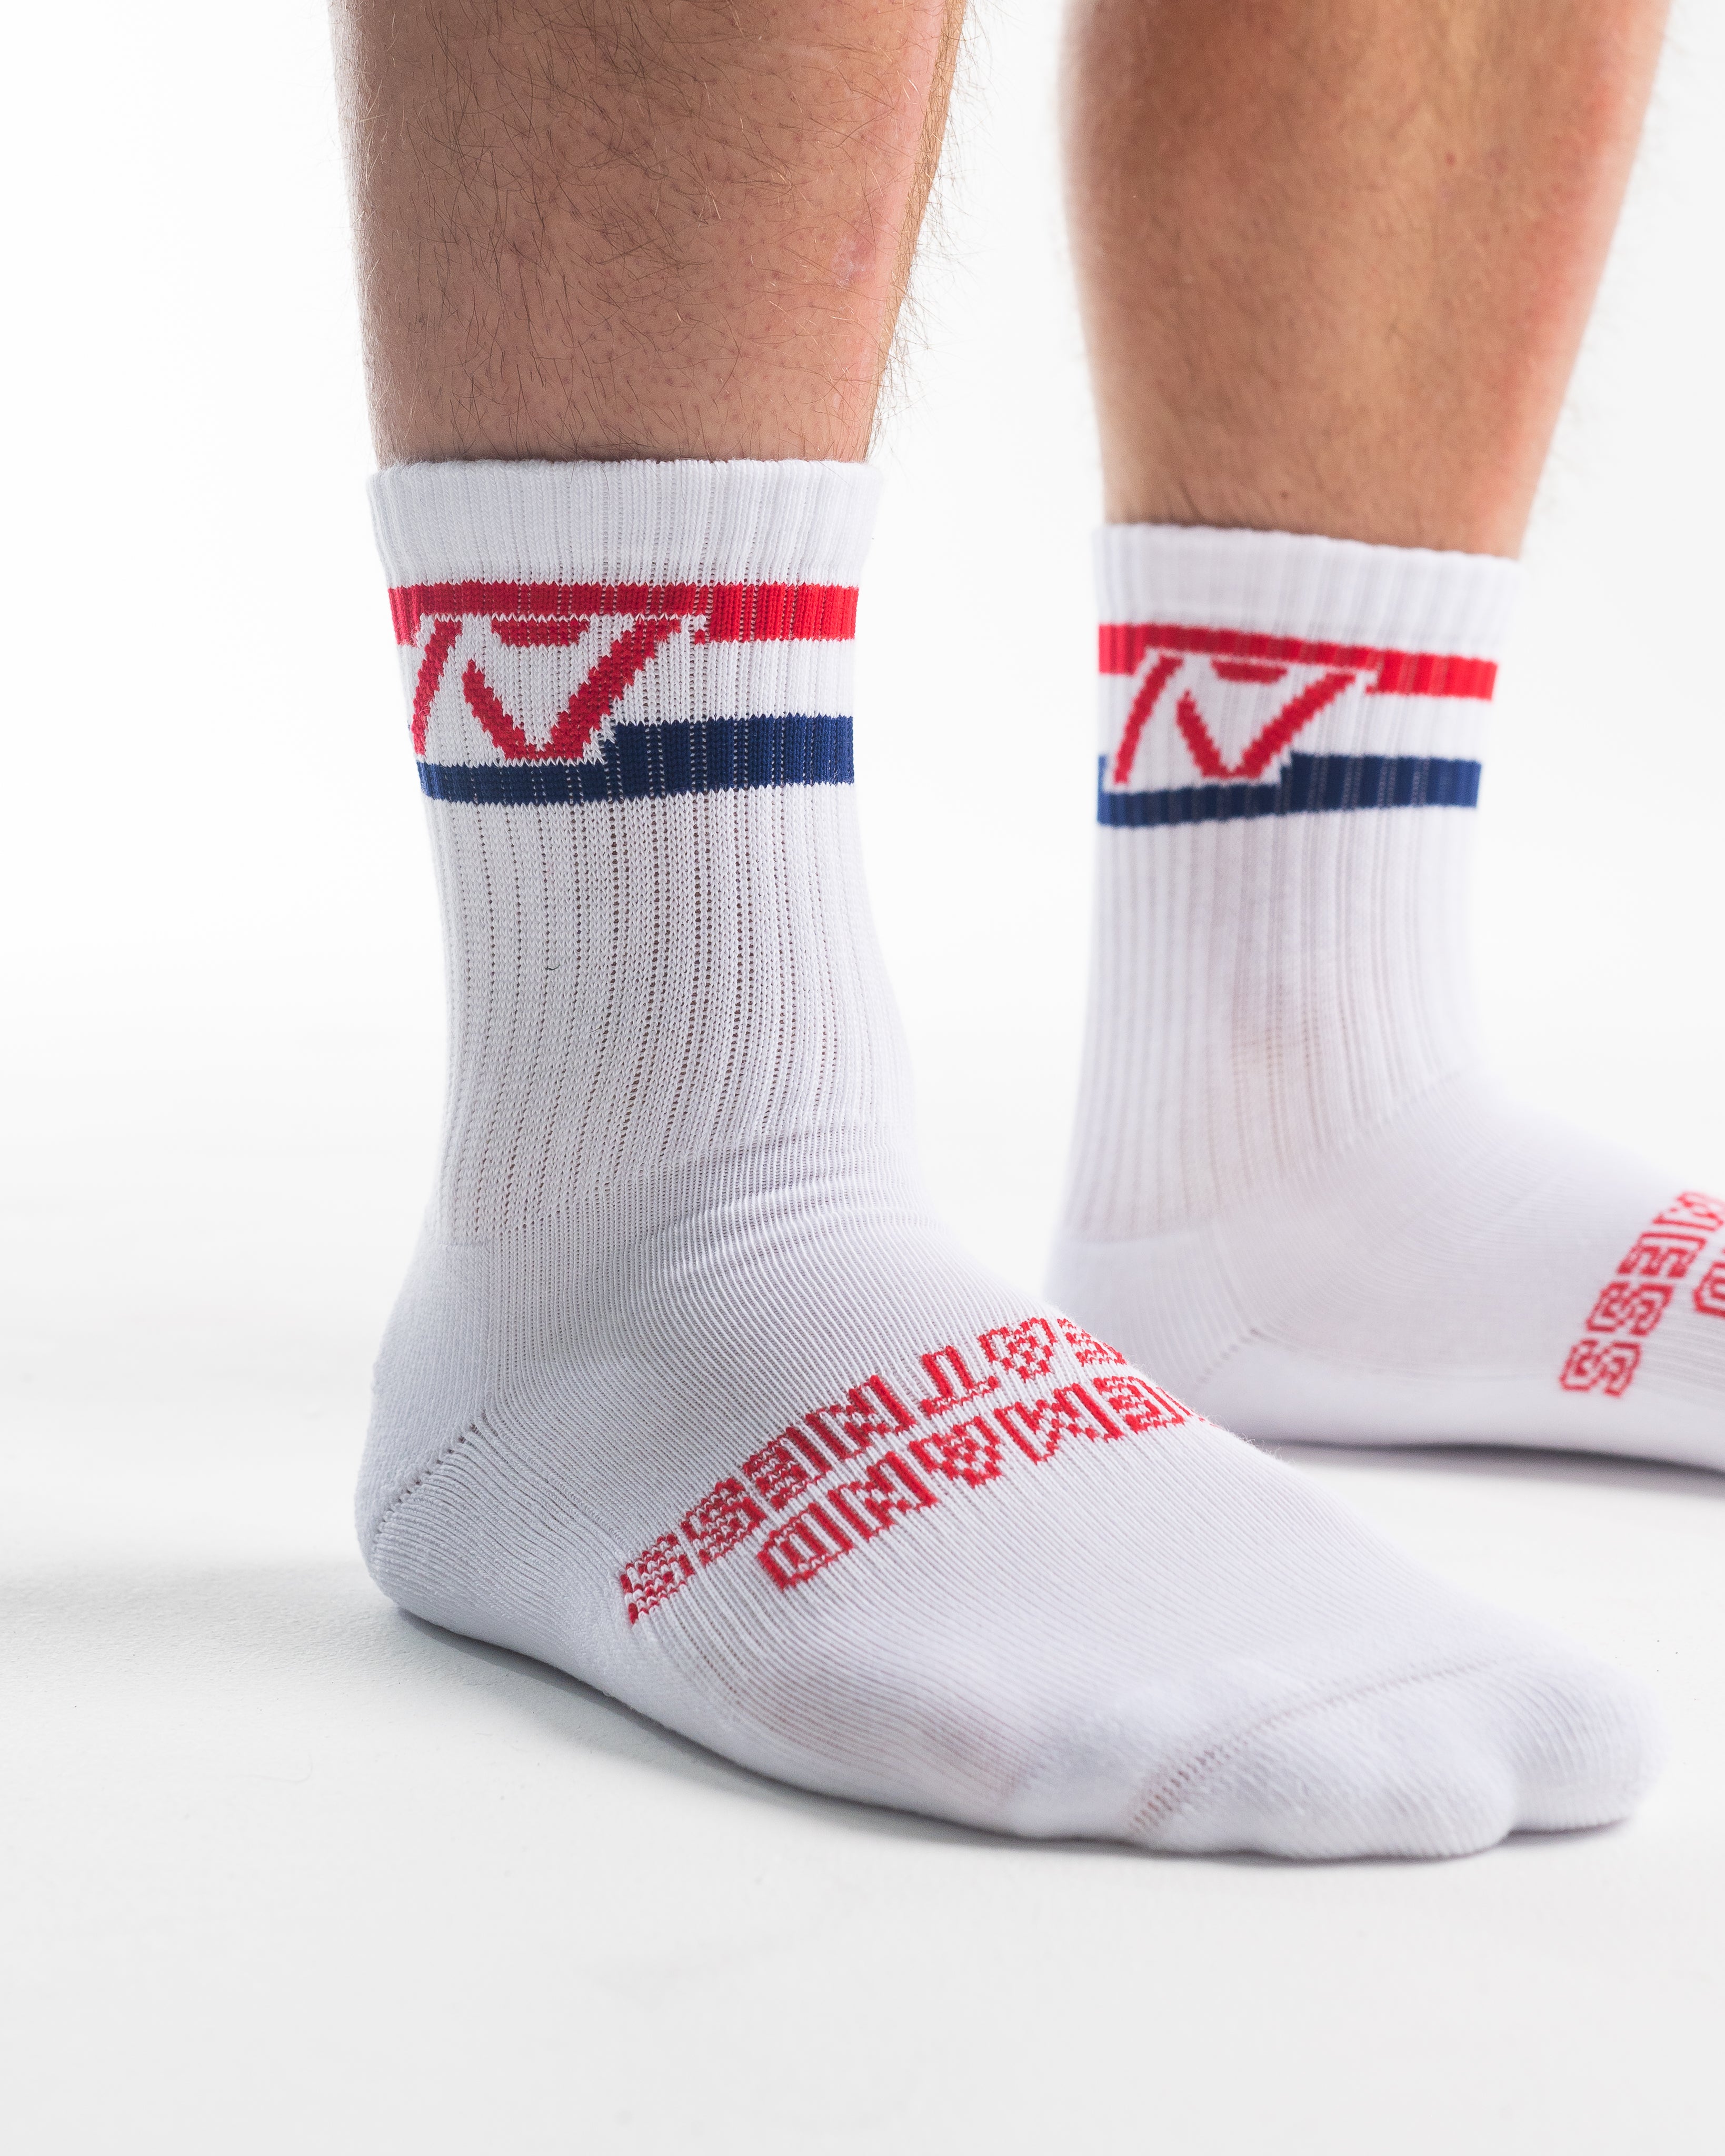 A7 RWB Crew socks showcase red, white and blue logos and let your energy show on the platform, in your training or while out and about. The IPF Approved Night Light Meet Kit includes Powerlifting Singlet, A7 Meet Shirt, A7 Zebra Wrist Wraps, A7 Deadlift Socks, Hourglass Knee Sleeves (Stiff Knee Sleeves and Rigor Mortis Knee Sleeves). All A7 Powerlifting Equipment shipping to UK, Norway, Switzerland 